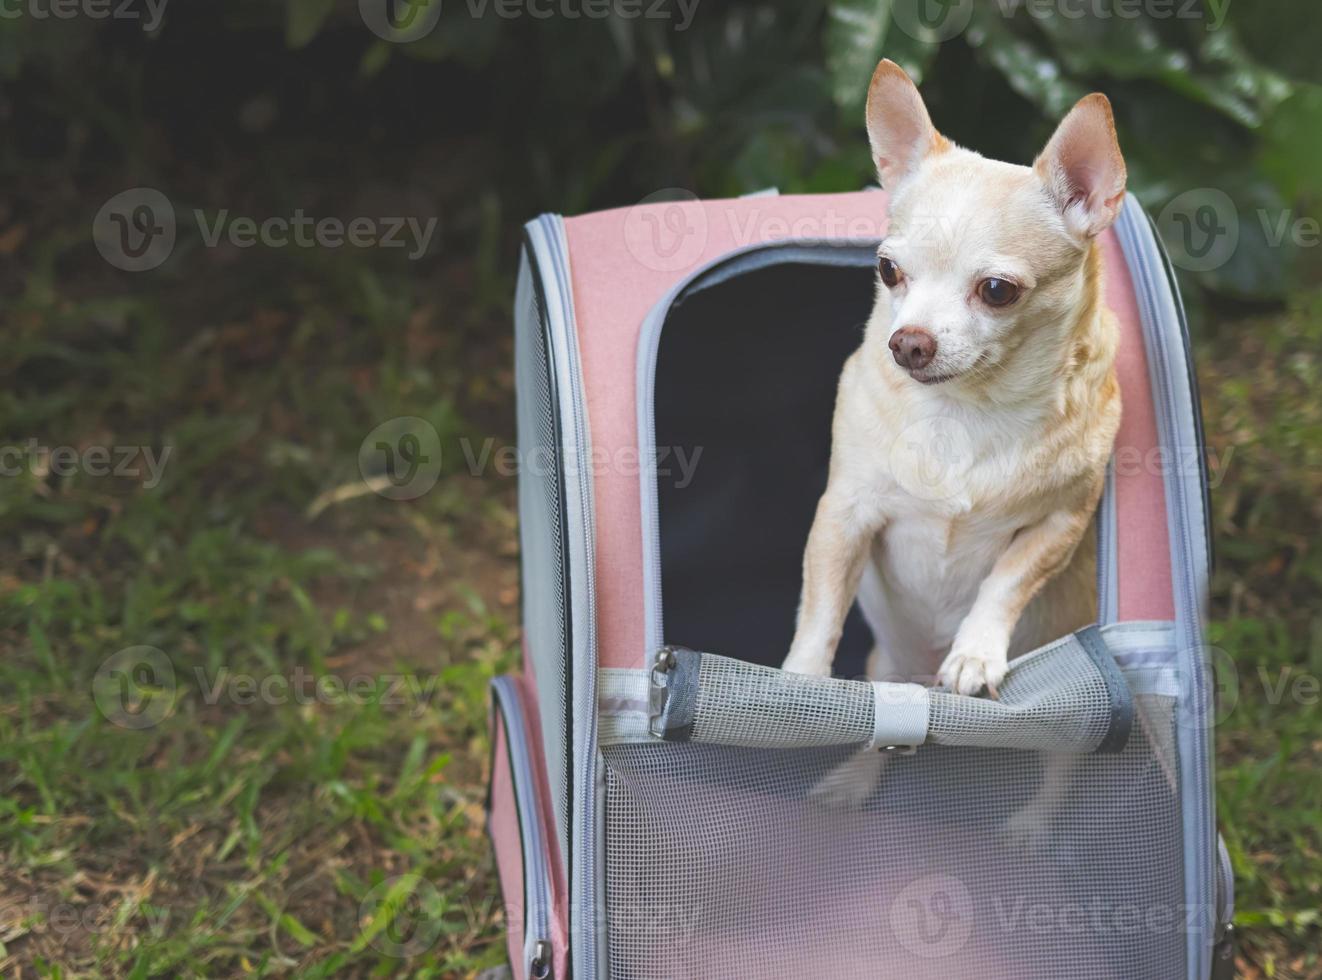 brown short hair chihuahua dog standing  in pet carrier backpack with opened windows outdoor in the garden,  looking away. photo